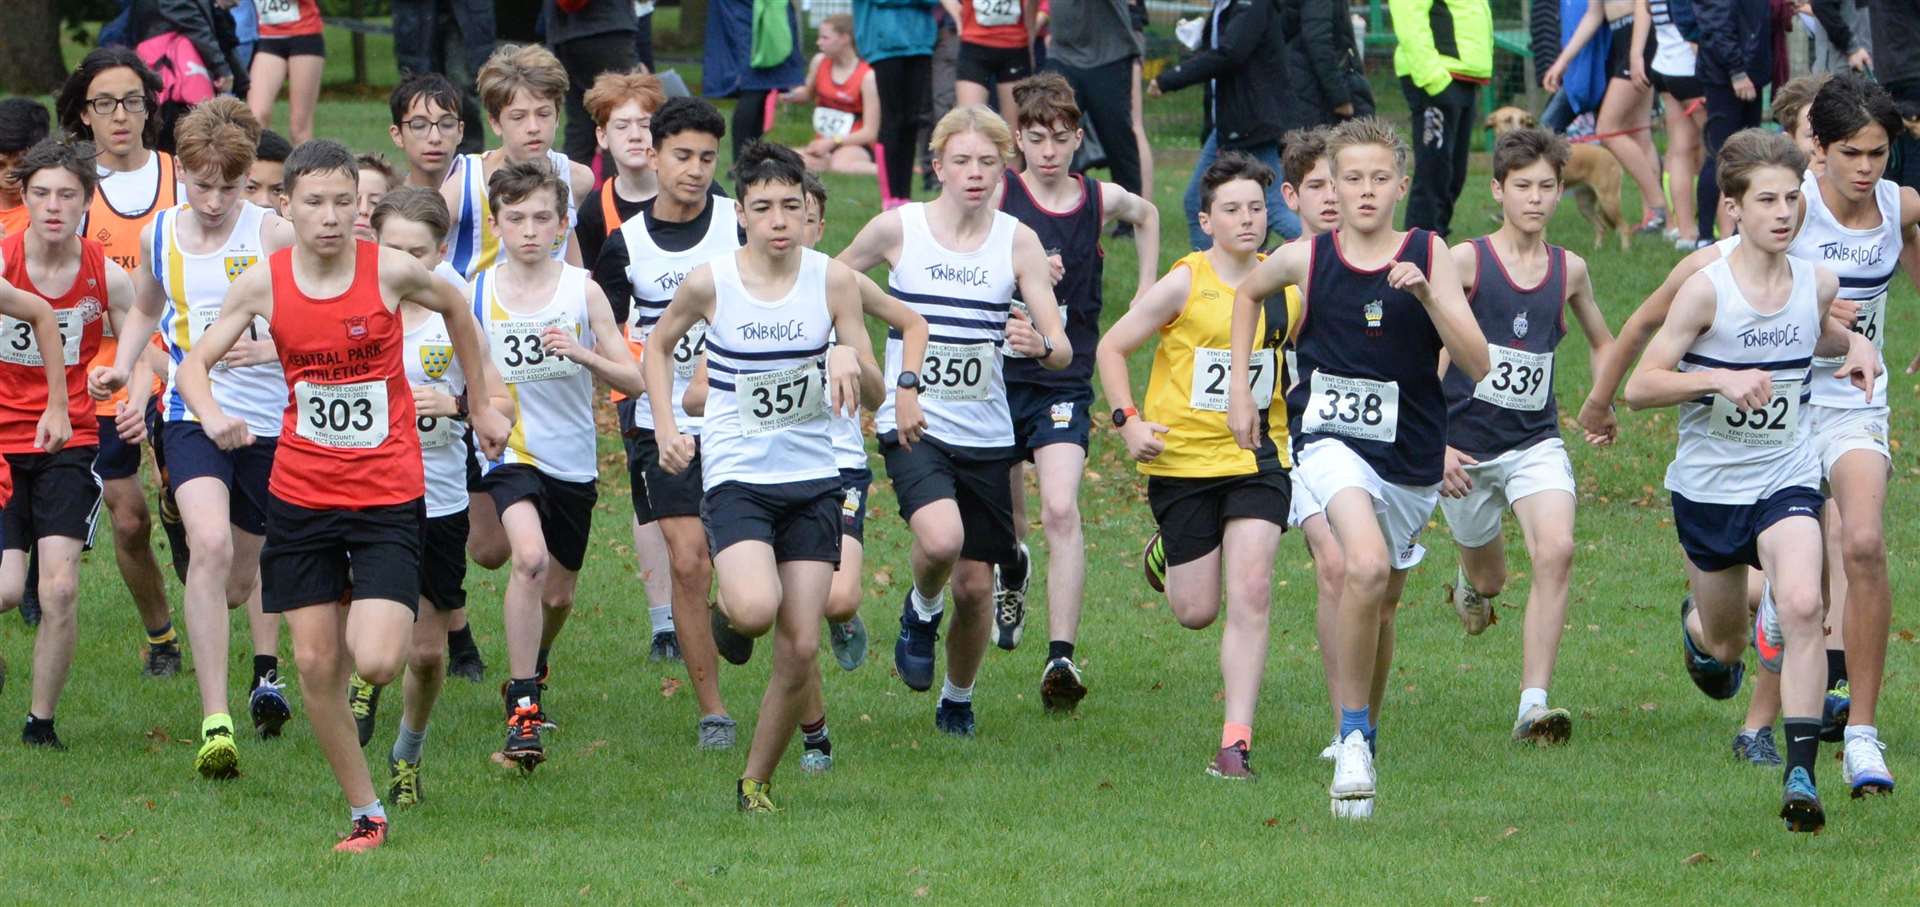 303 Jake Greenwood (Central Park Athletics), 357 Daniel Jeddo (Tonbridge AC) and 338 George Bishop (The Judd School) jostle for position in the under-15 boys' race at the Kent Cross-Country League at Swanley Park on Saturday. Picture: Chris Davey